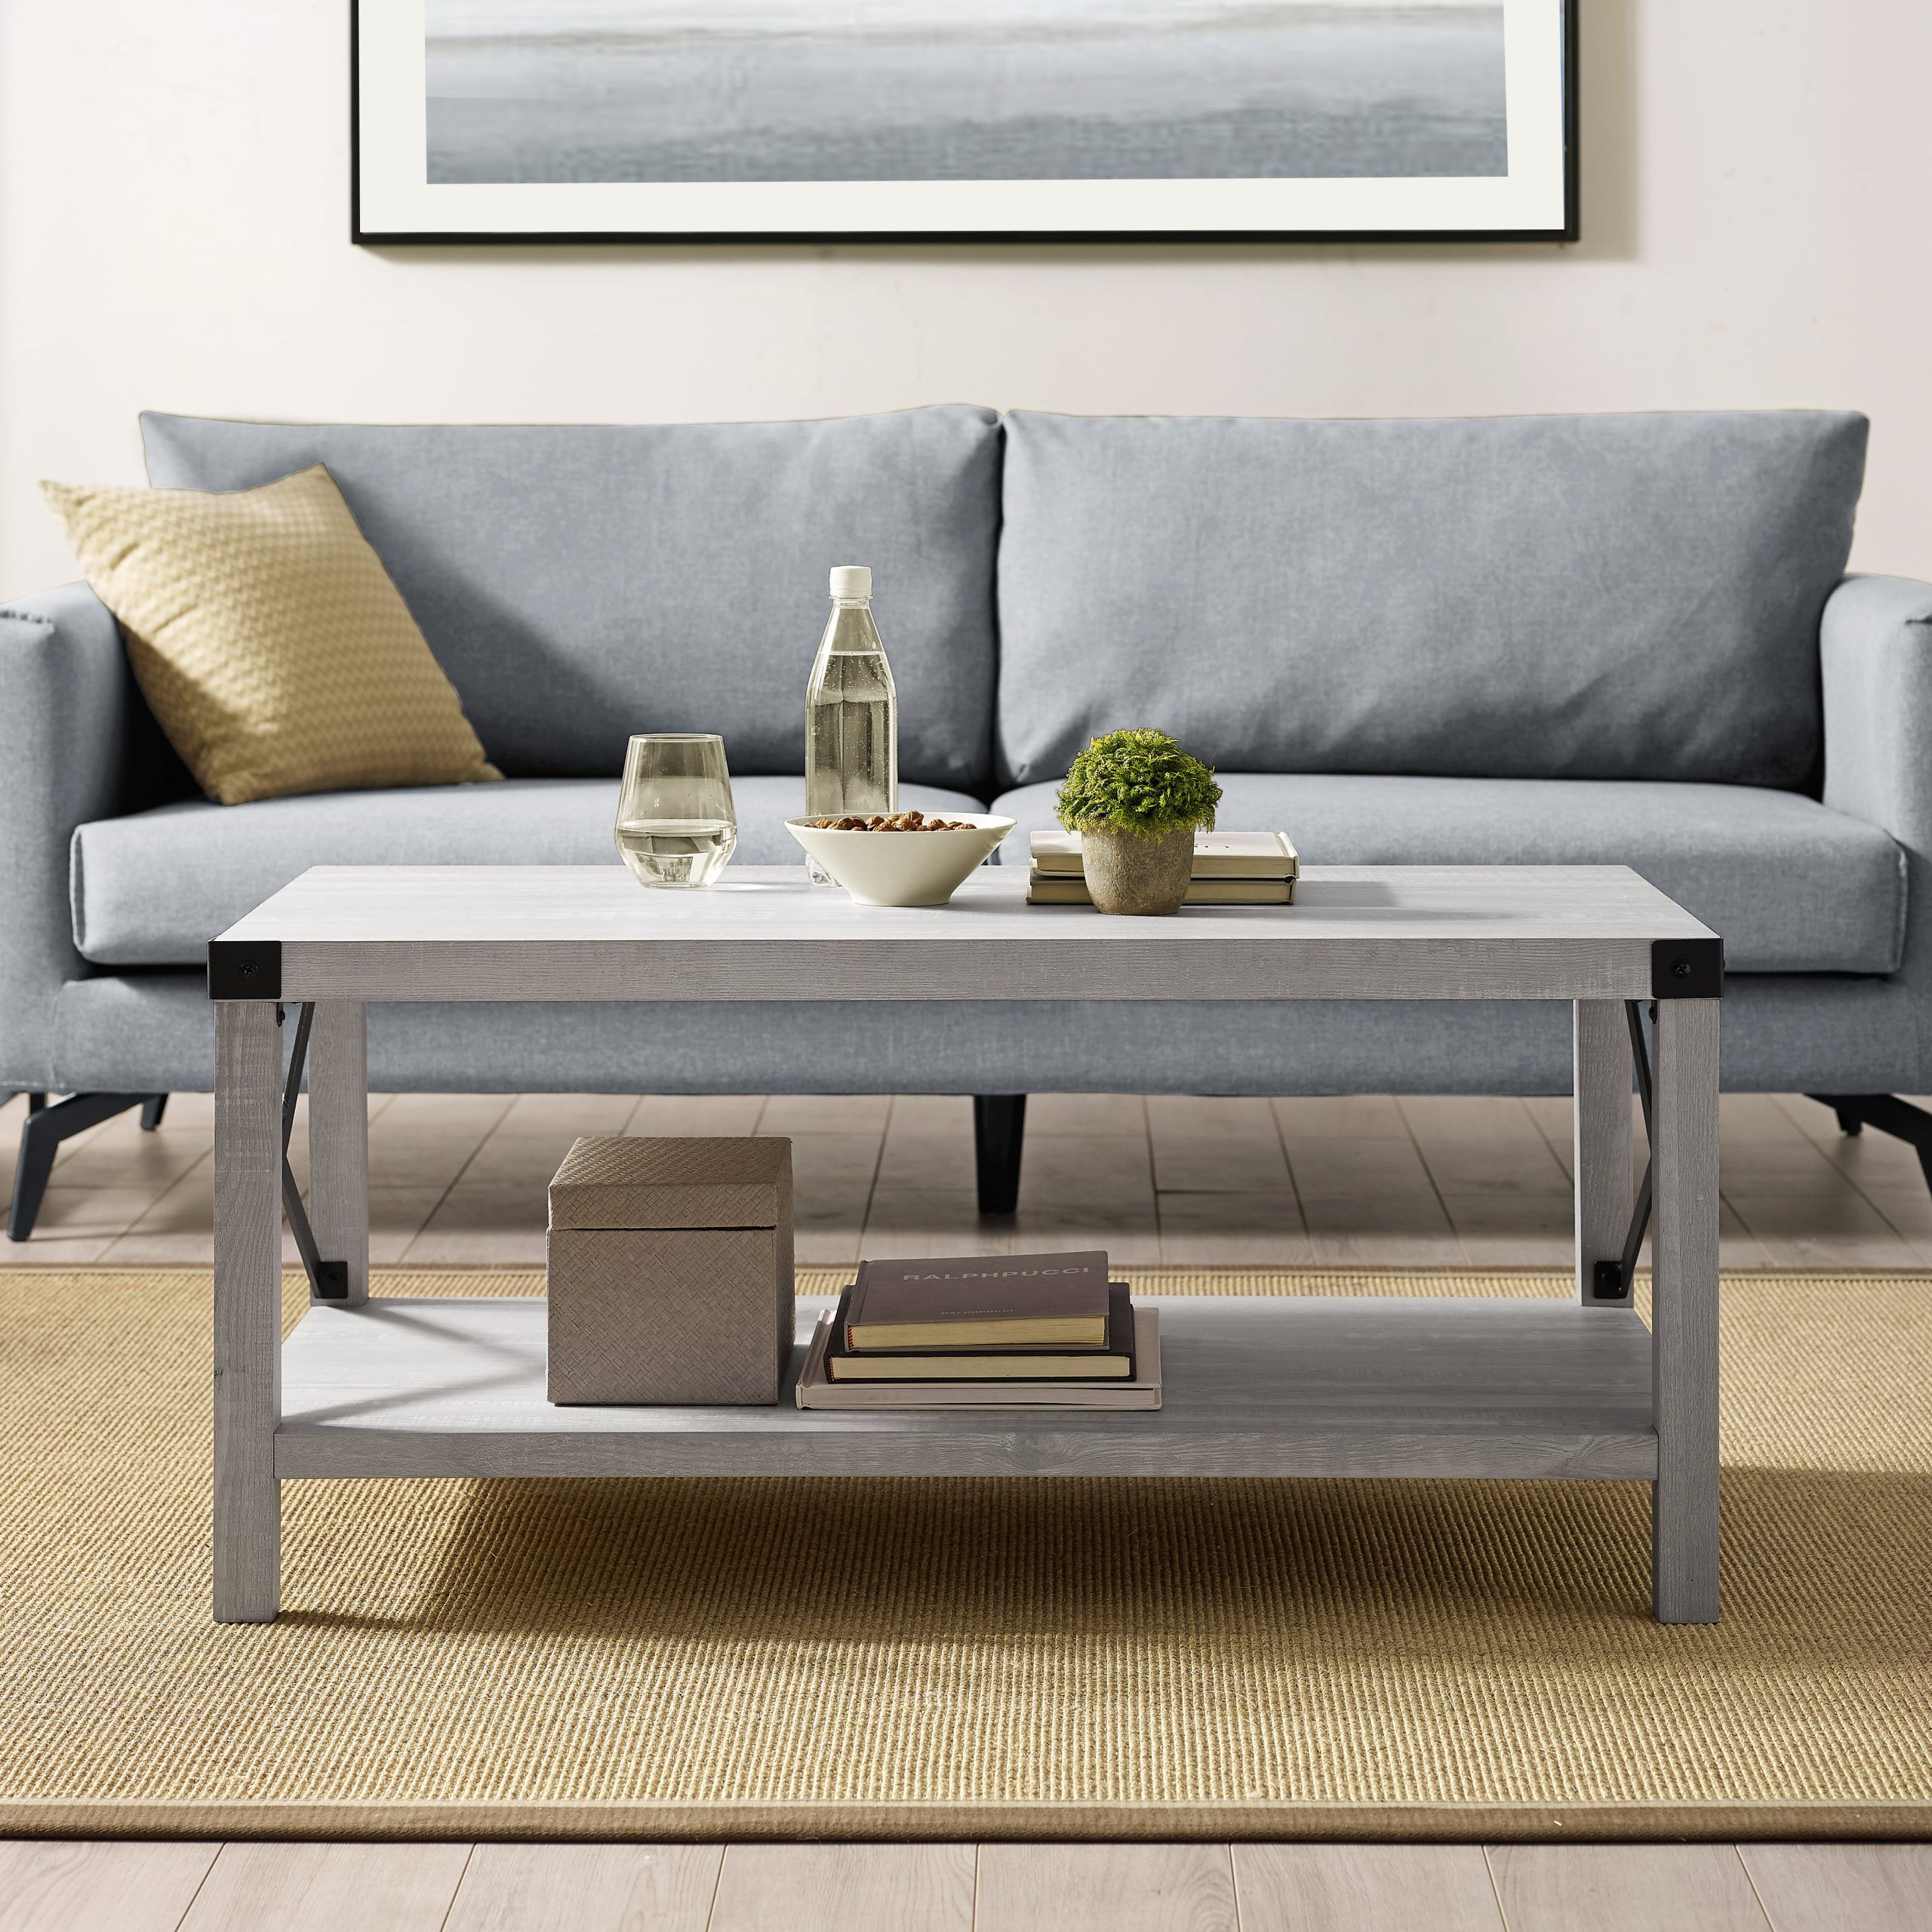 Woven Paths Magnolia Metal X Coffee Table, Stone Grey – Walmart Regarding Woven Paths Coffee Tables (Photo 7 of 15)